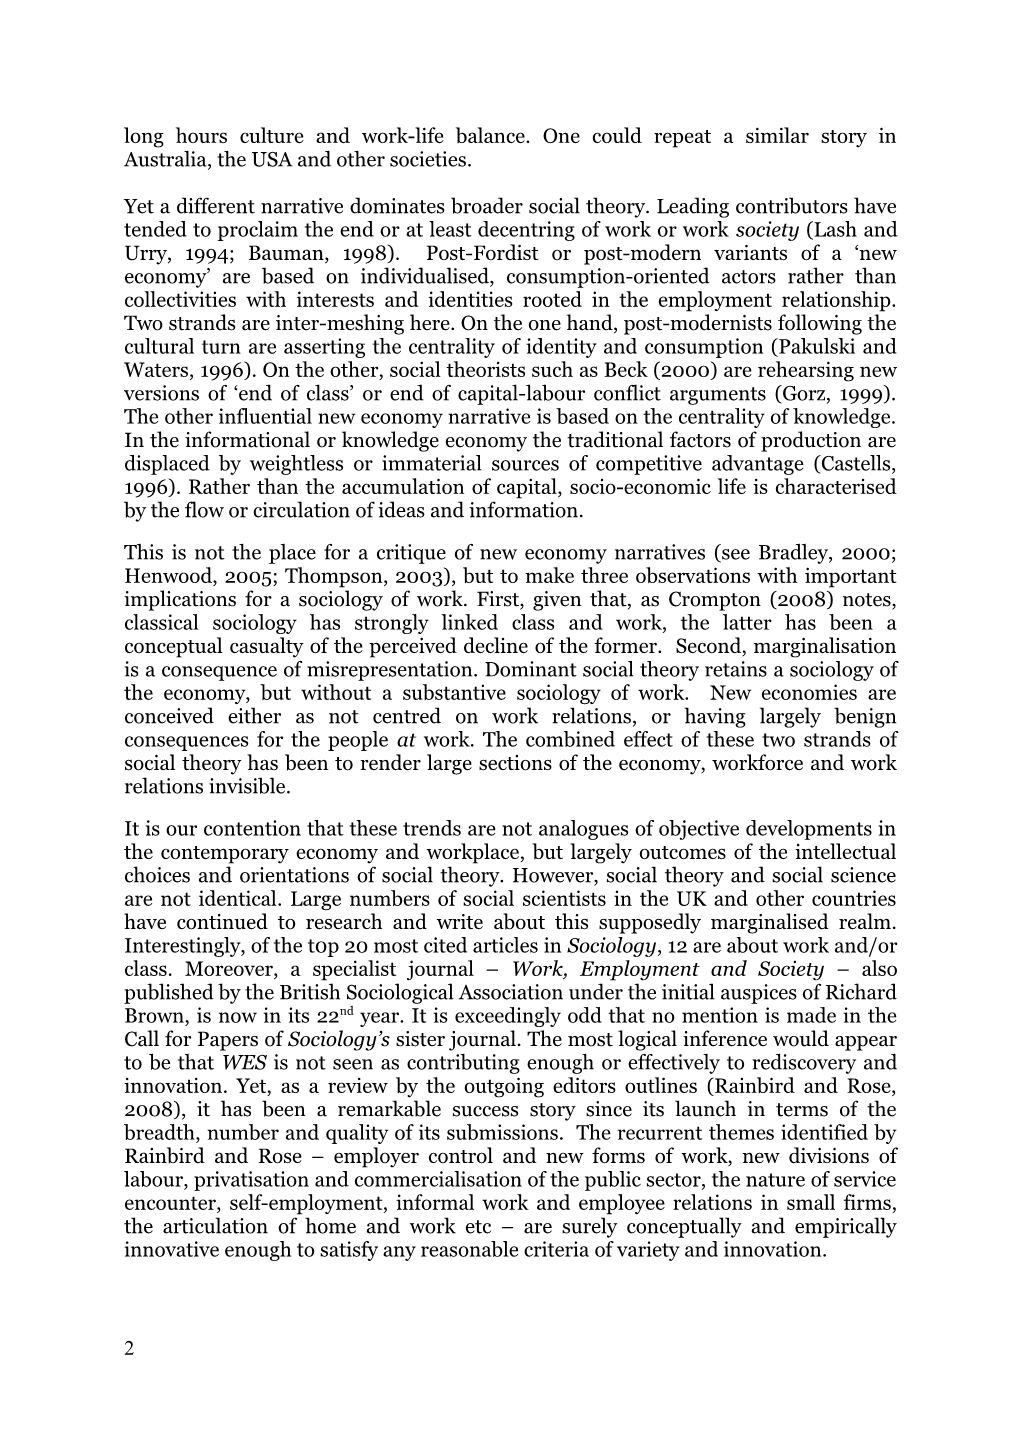 Paper for Special Issue of Sociology